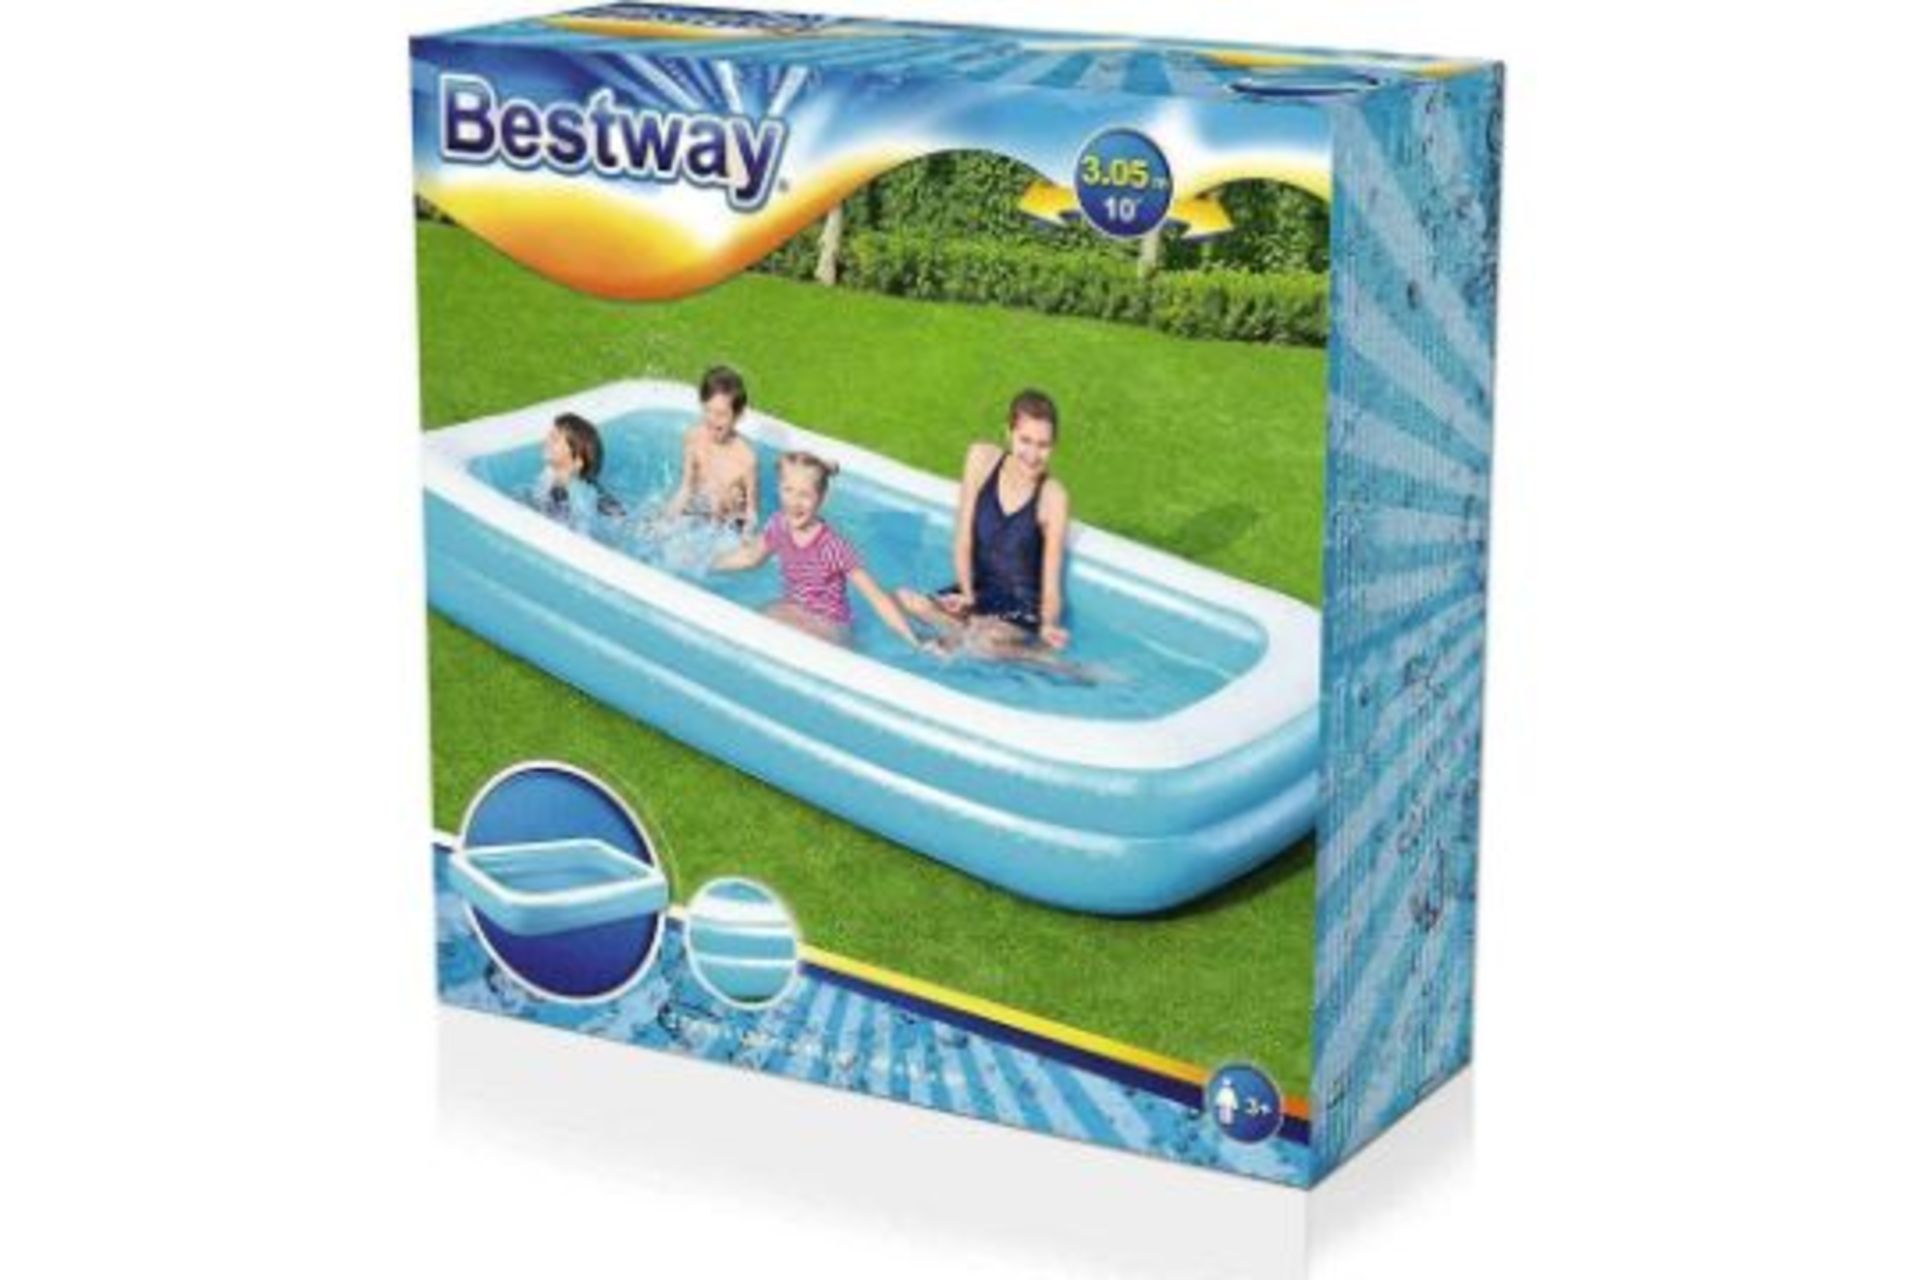 New Bestway 3.05m Blow Up Paddling Pool (2 rings high not 3) - Image 2 of 2